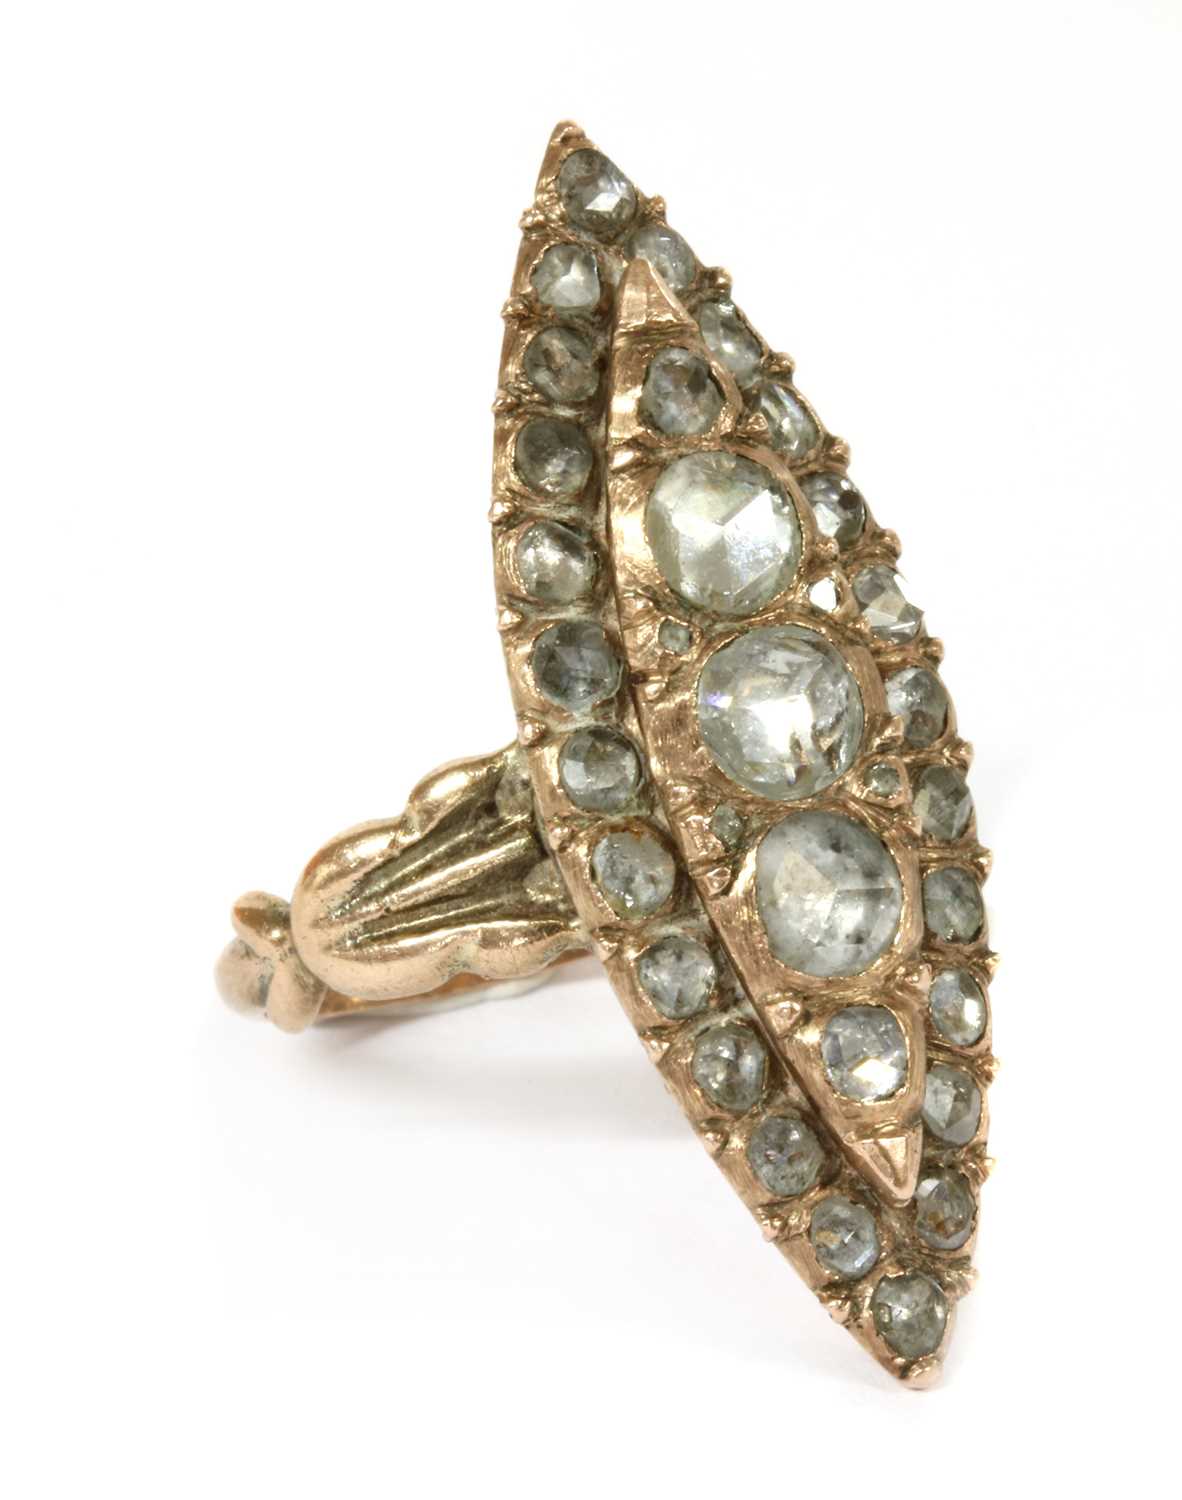 Lot 7 - An early 20th century gold navette shaped diamond cluster ring